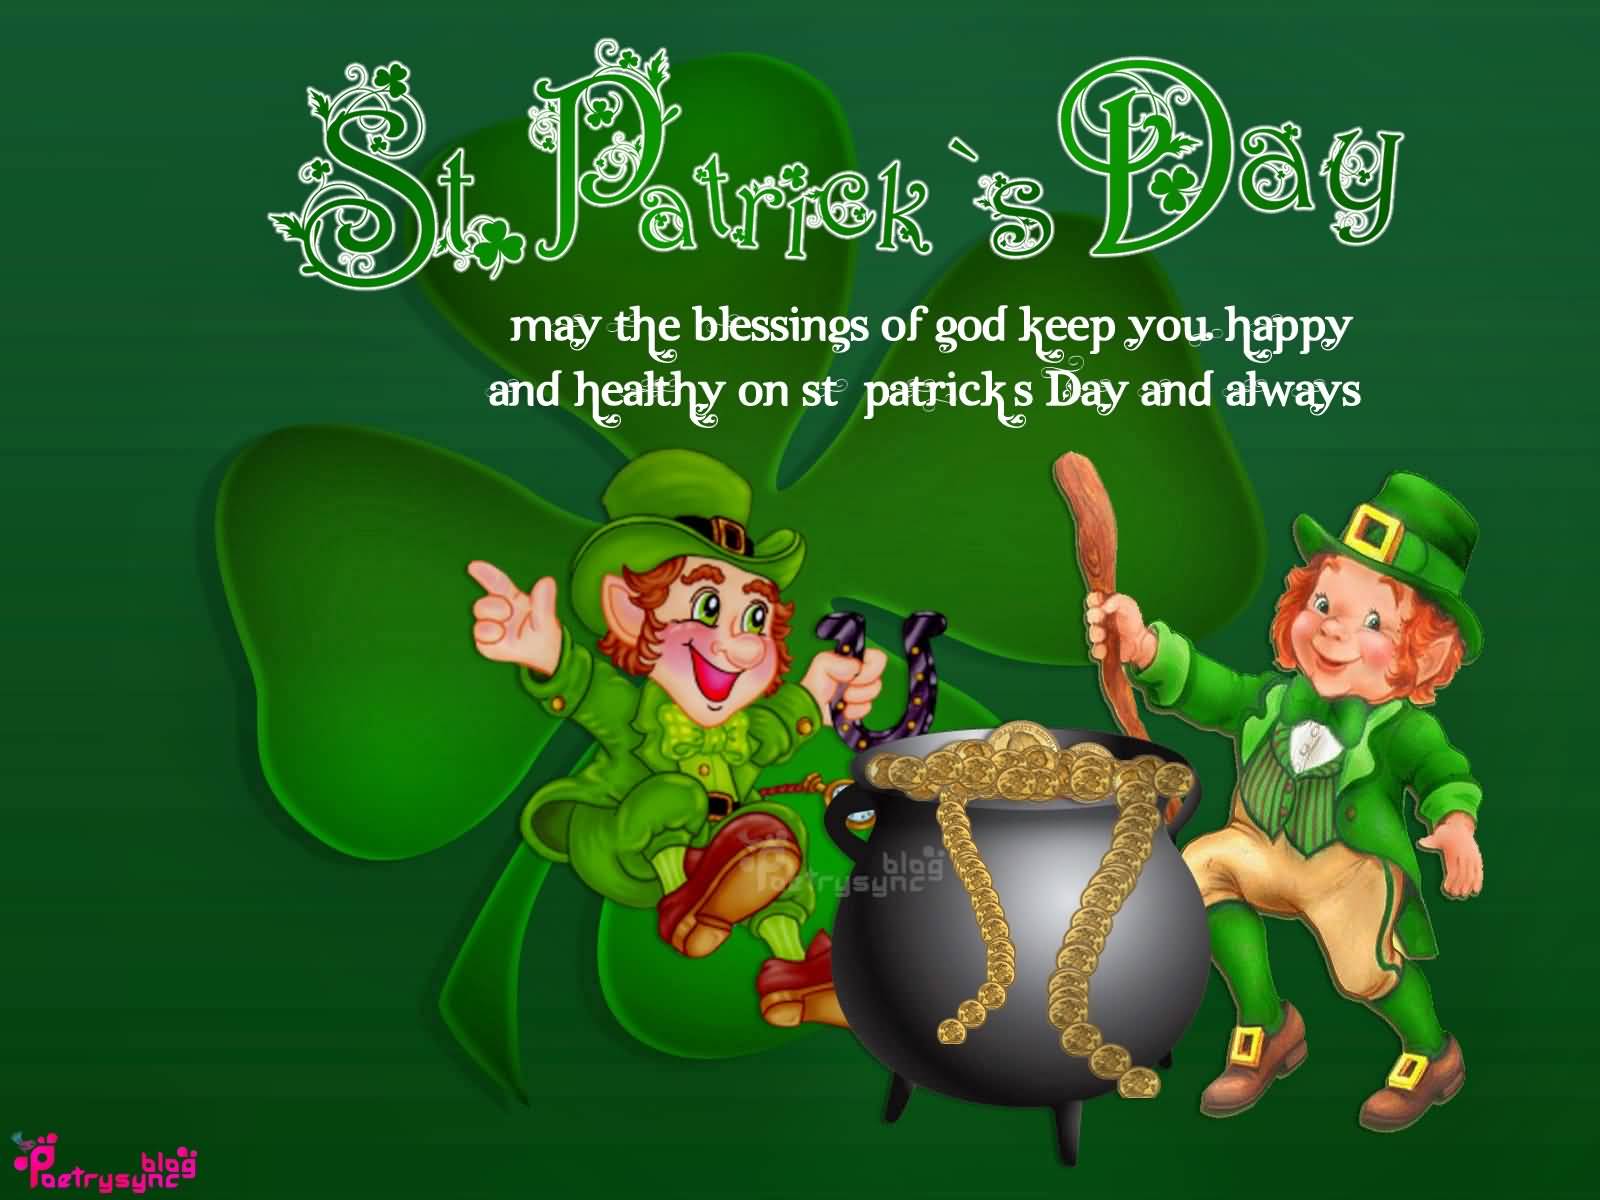 Saint Patrick’s Day May The Blessings Of Good Keep You Happy And Healthy On Saint Patrick’s Day And Always